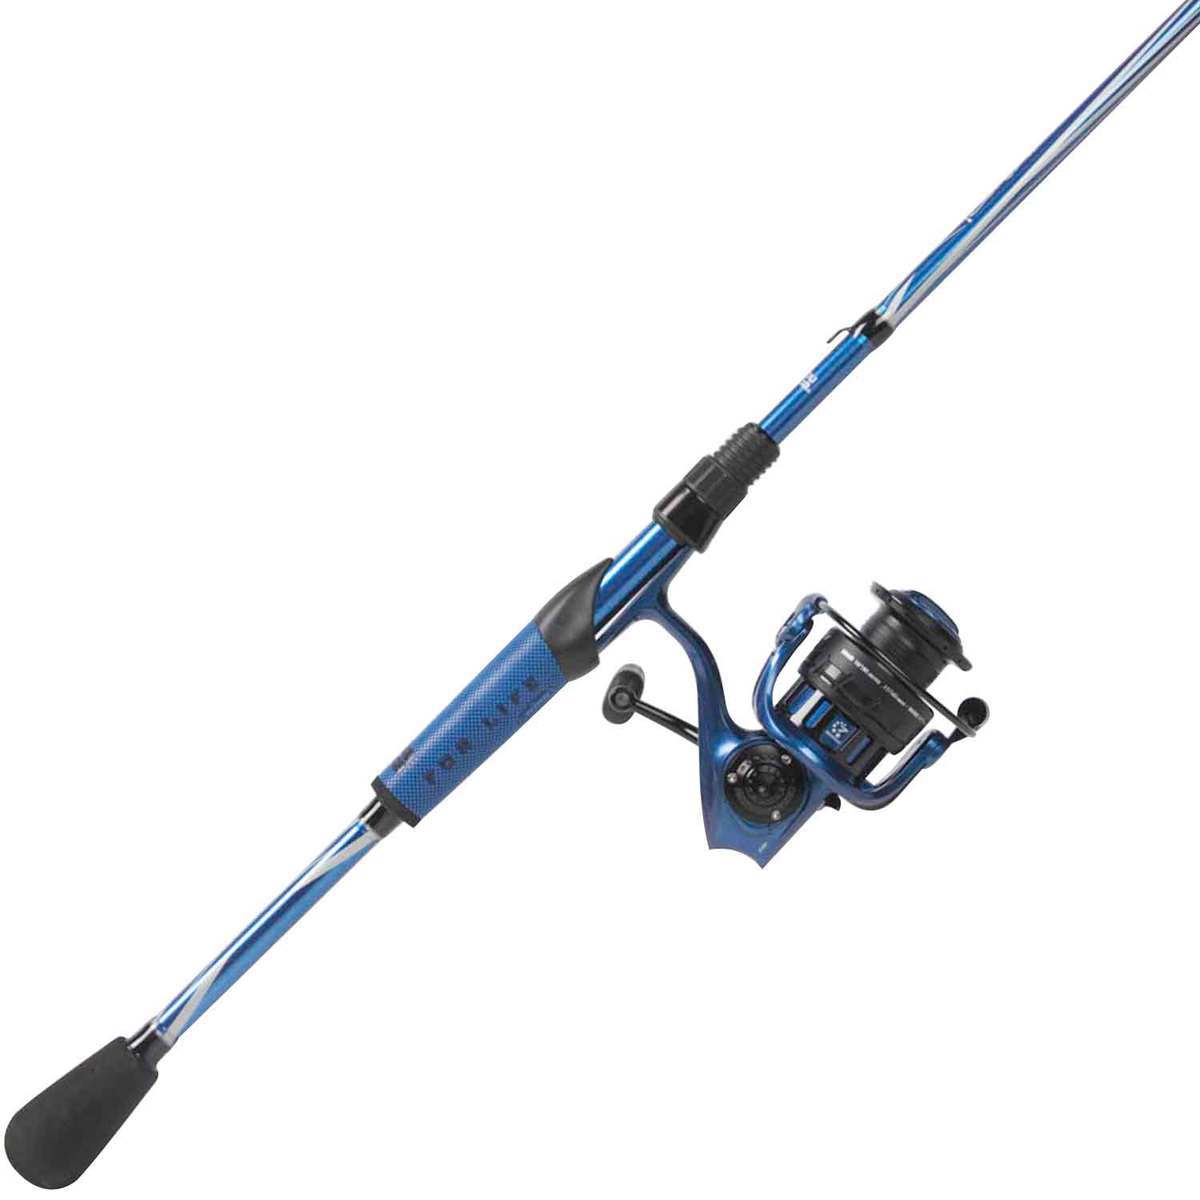 Abu Garcia Revo X Cast Combo 7ft 10-30g MH Rod and Reel Camo Green 1511764  for sale online